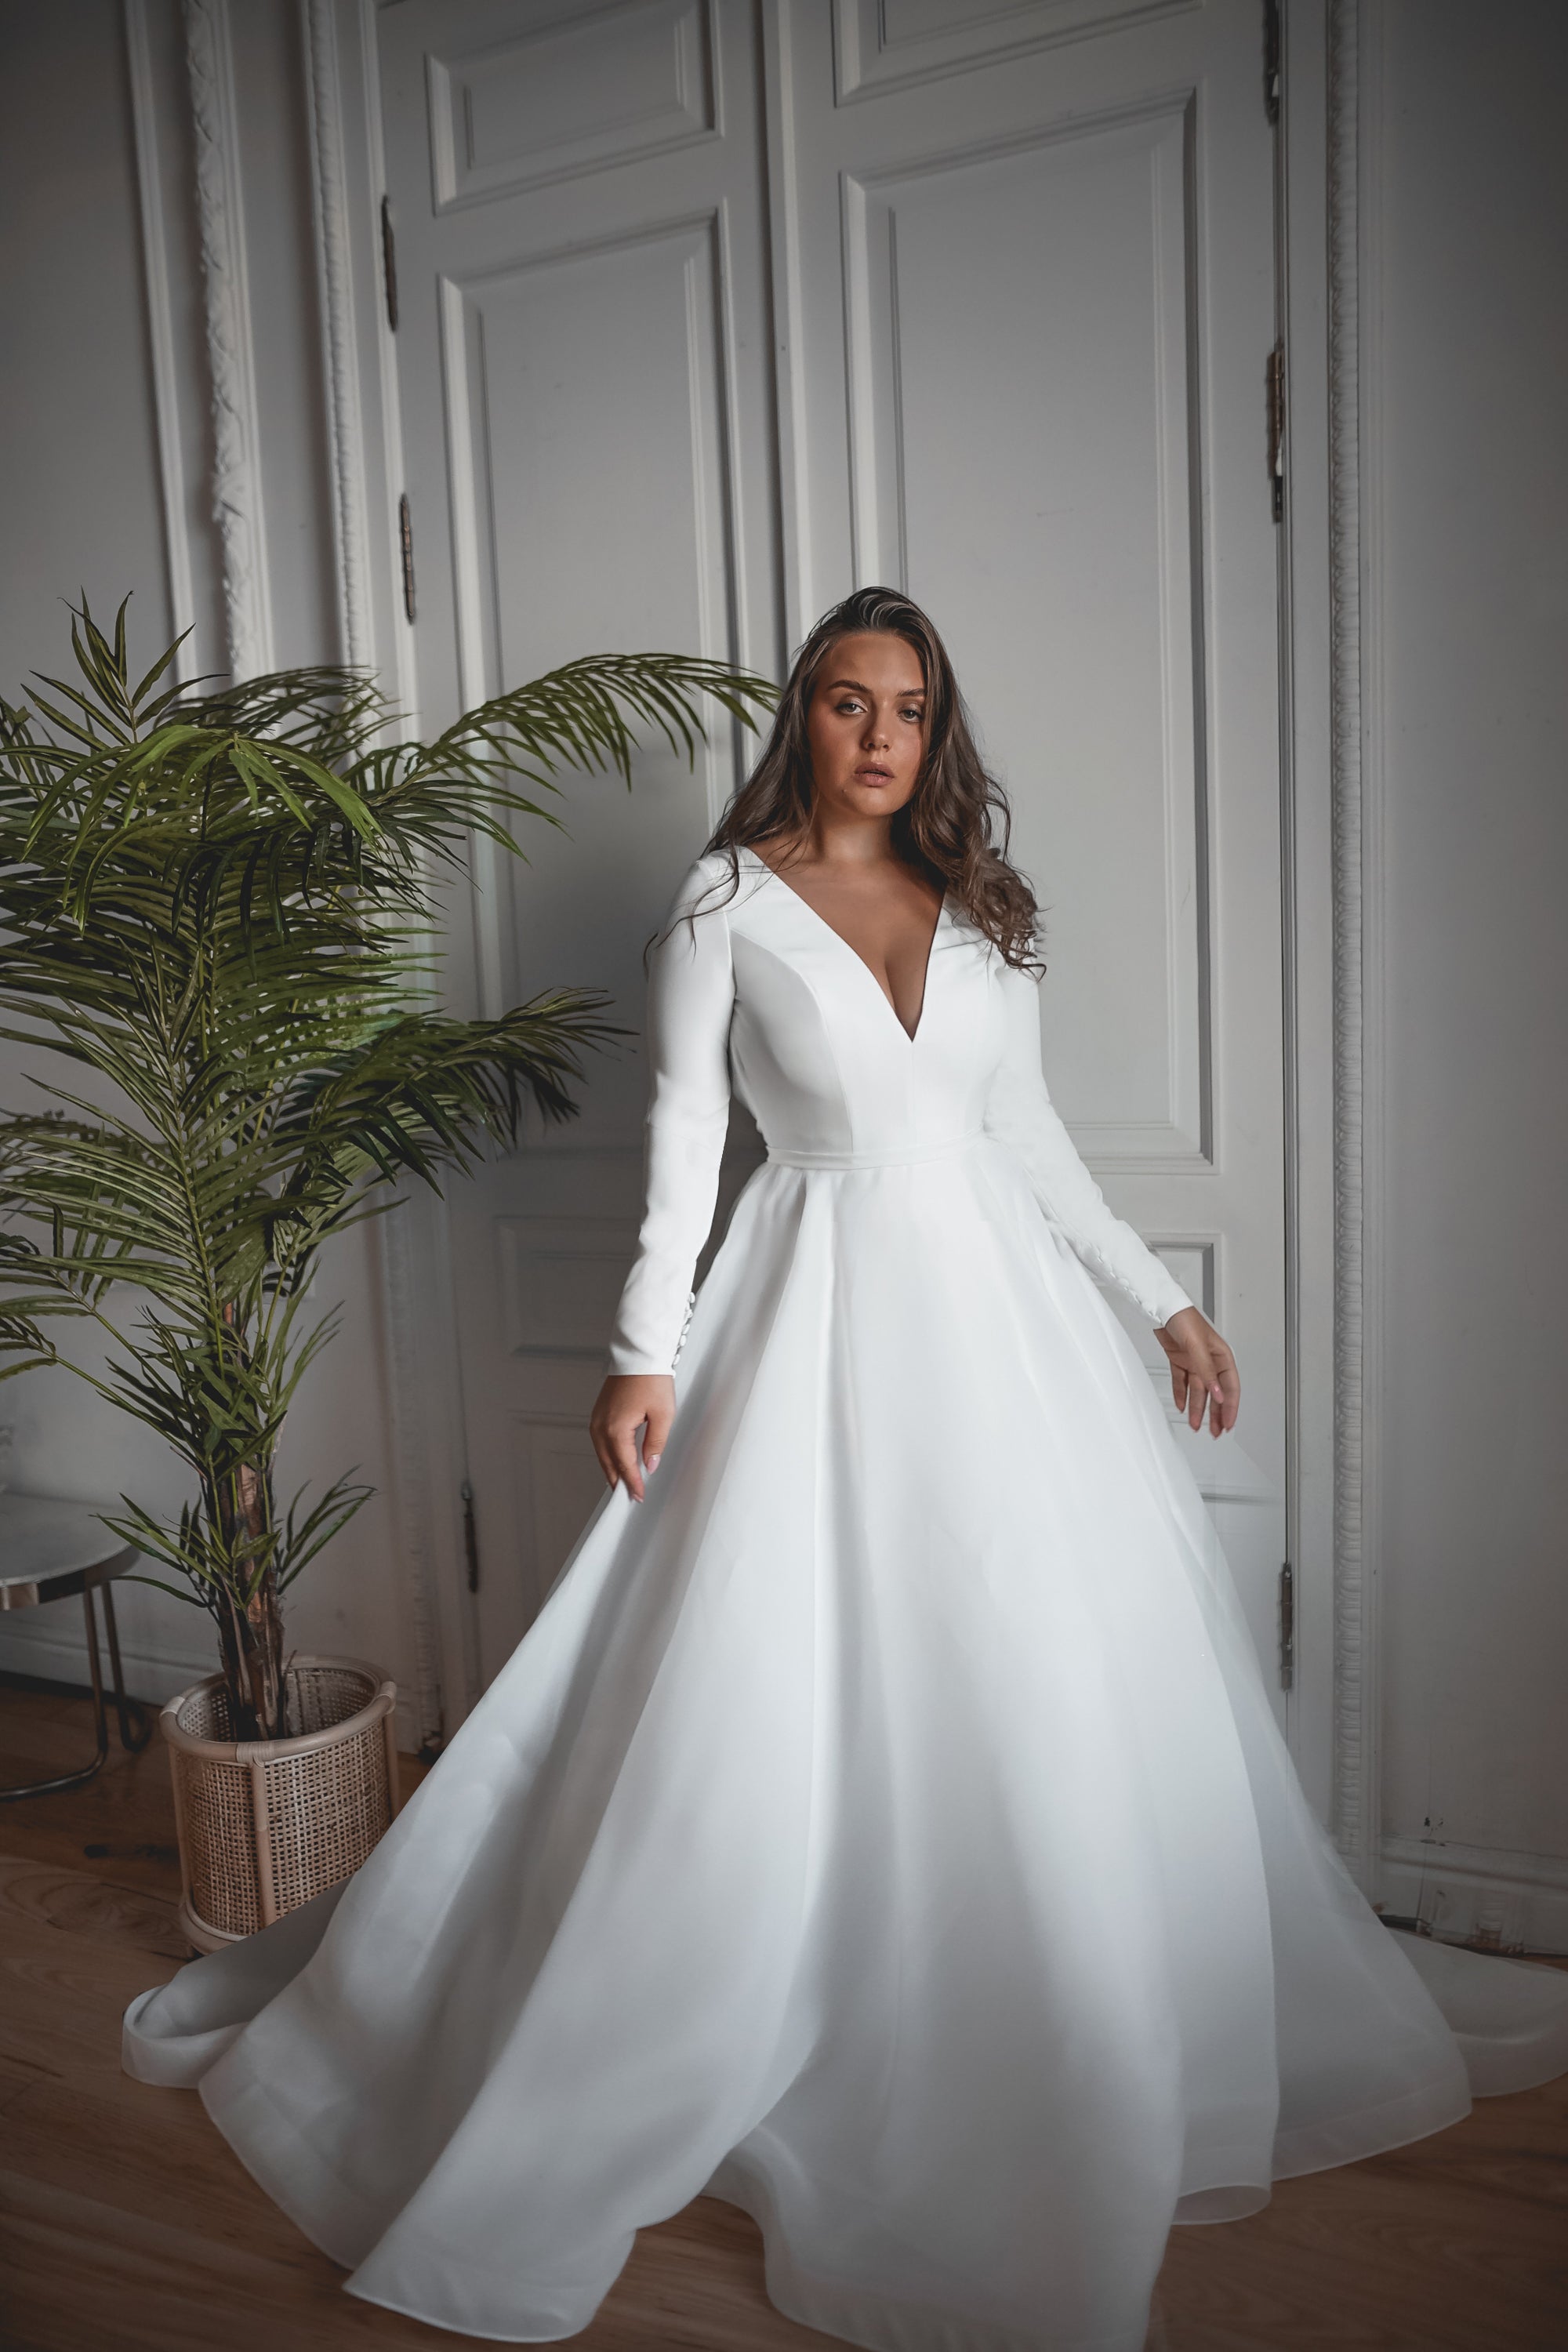 Discover more than 158 simple bridal gown